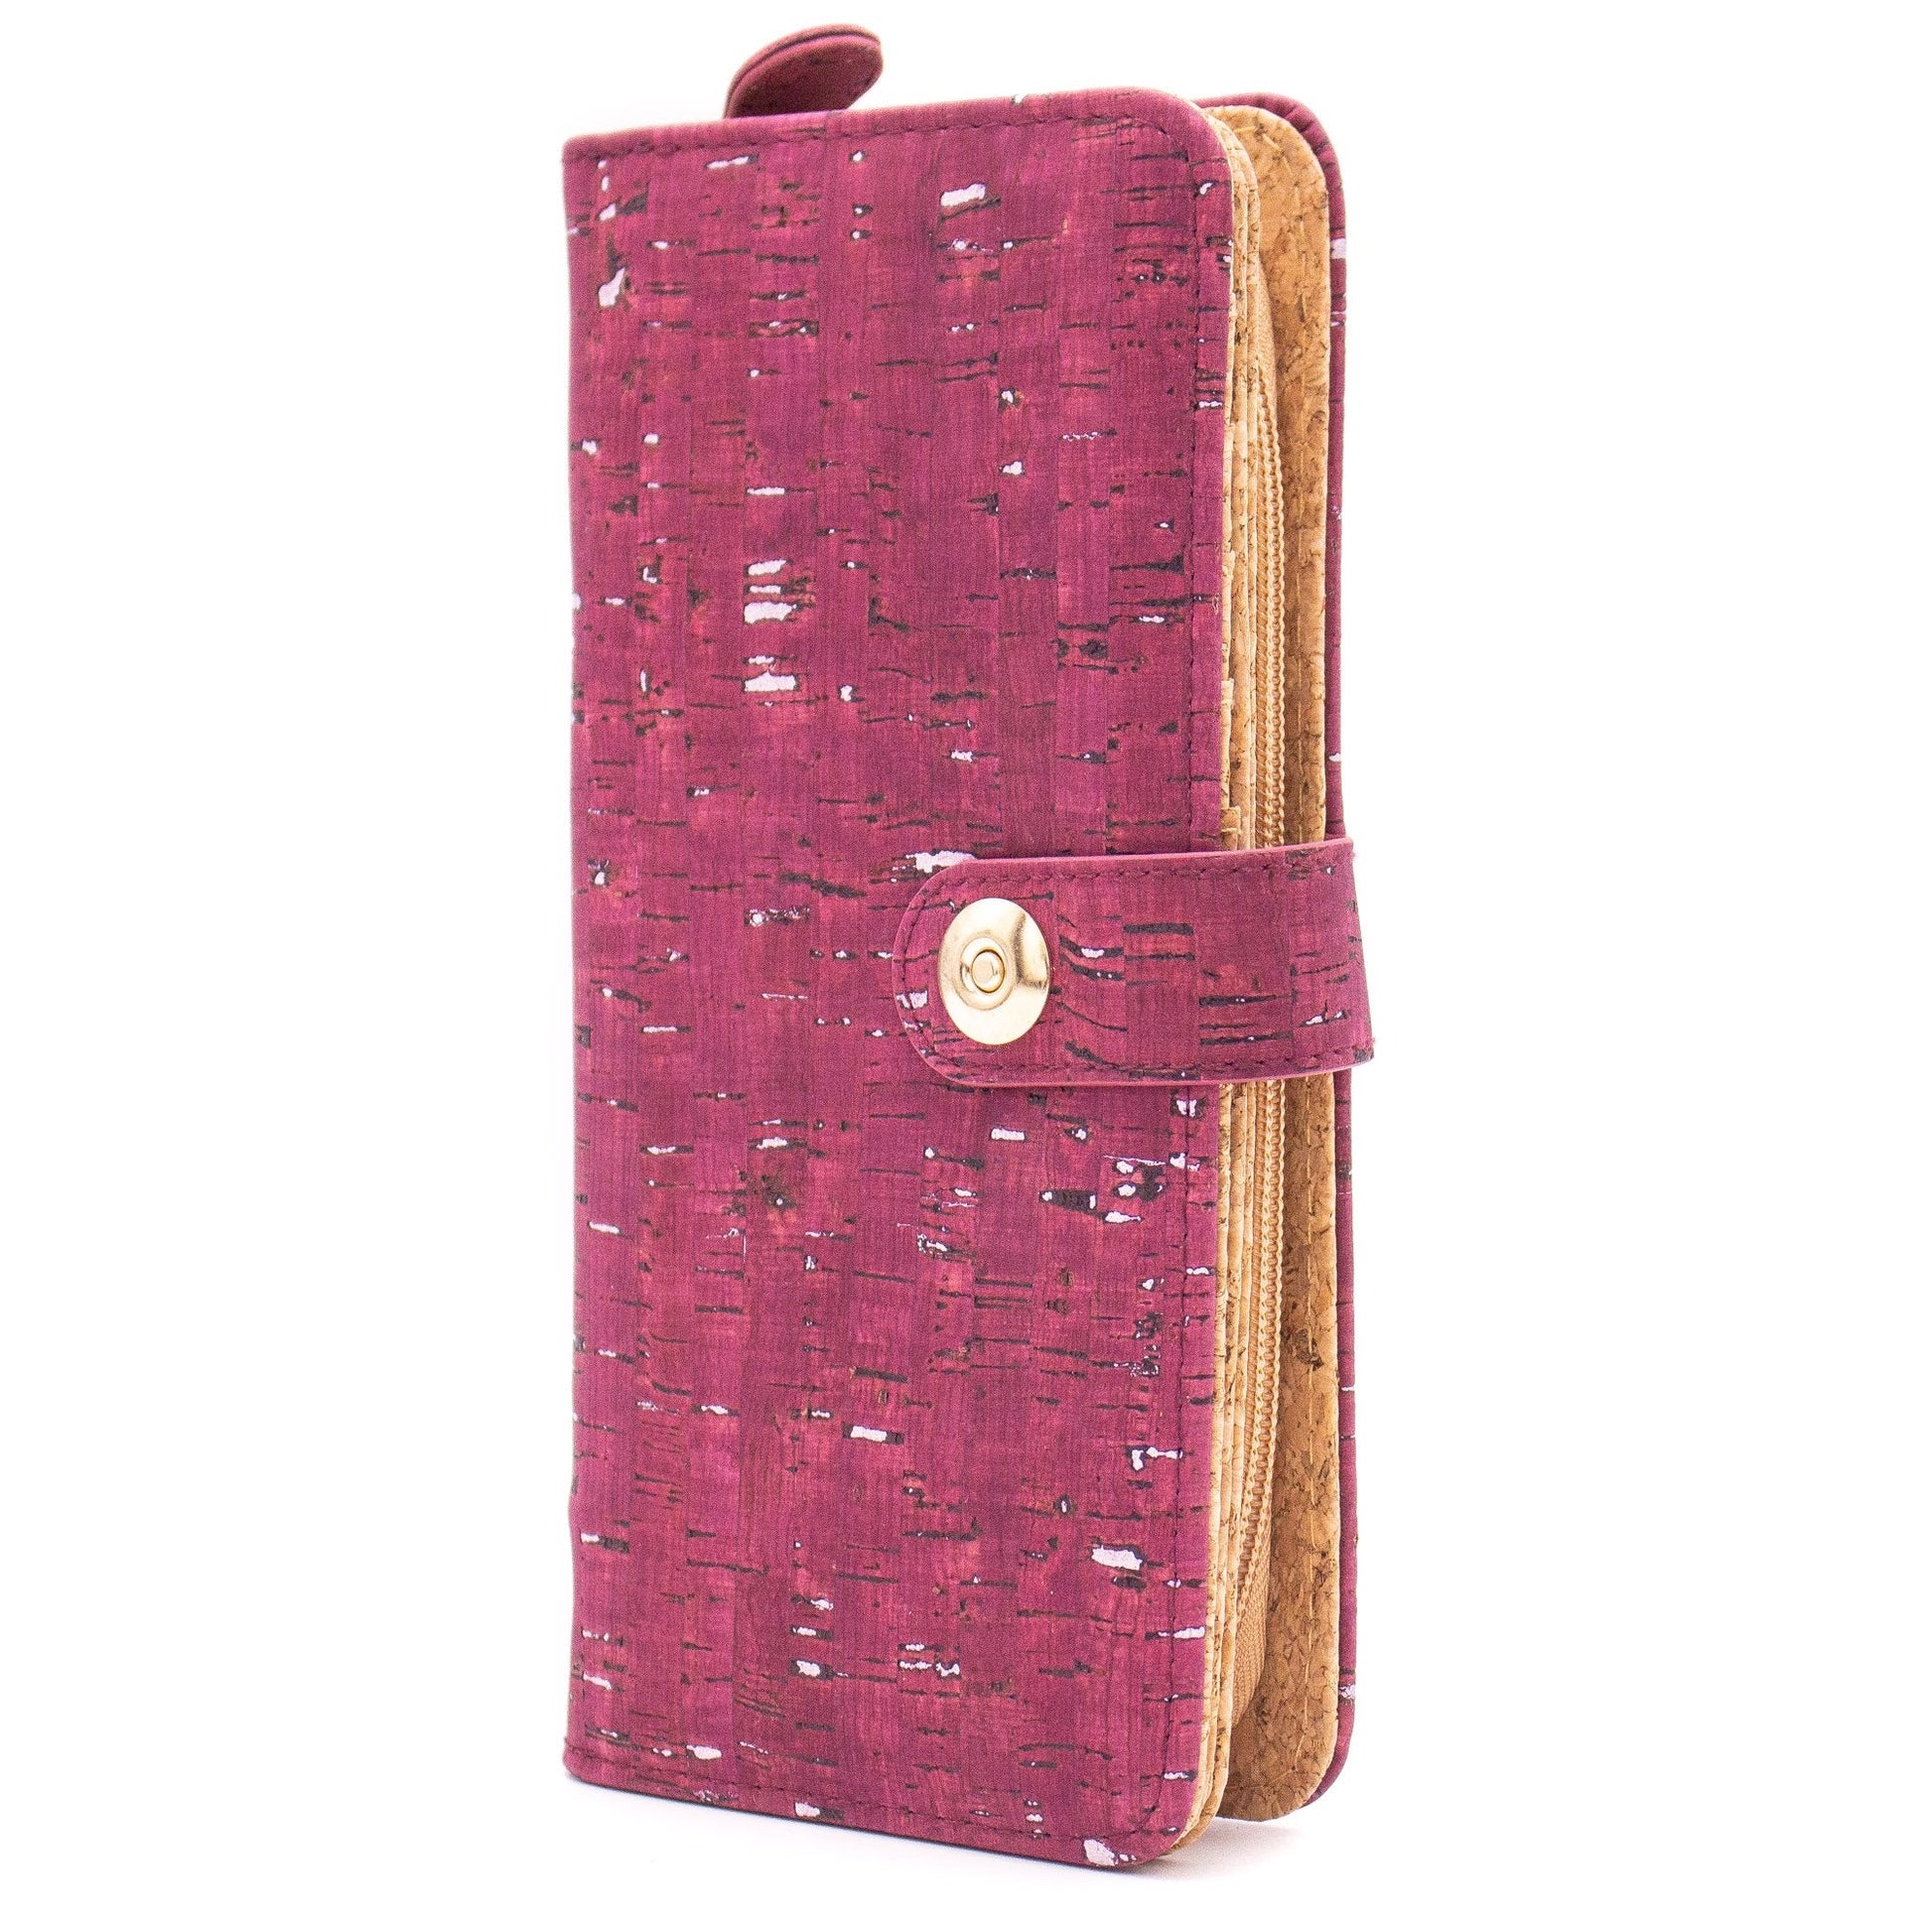 Wine Red & Silver w/ magnet closure Cork Wallet | THE CORK COLLECTION